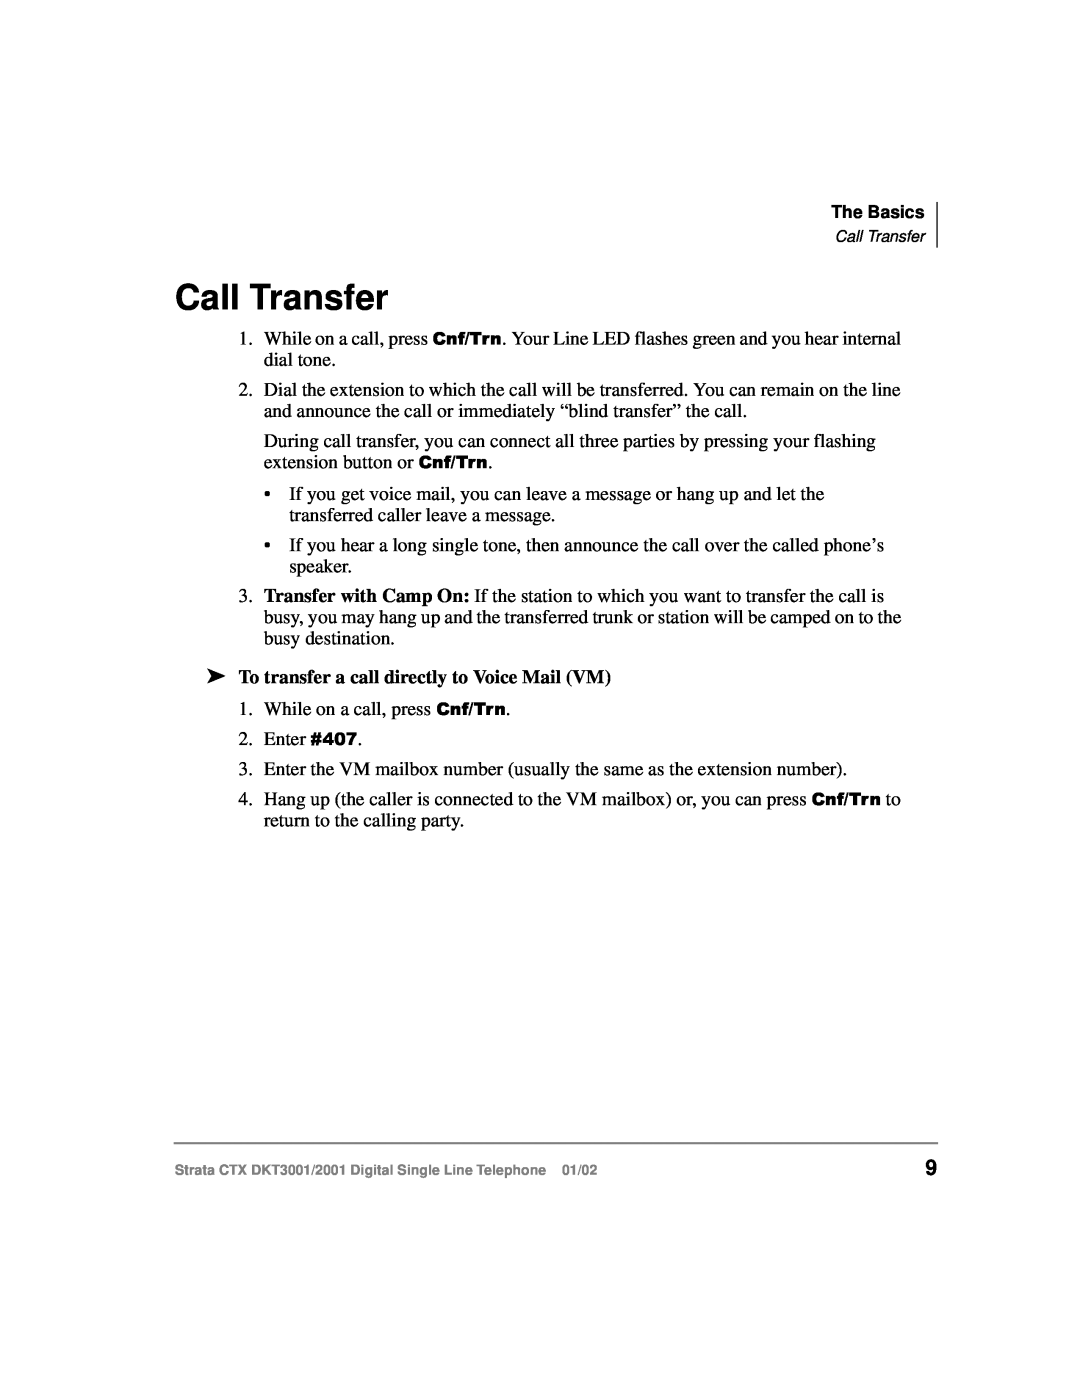 Toshiba 2001, DXT3001 manual Call Transfer, To transfer a call directly to Voice Mail VM 